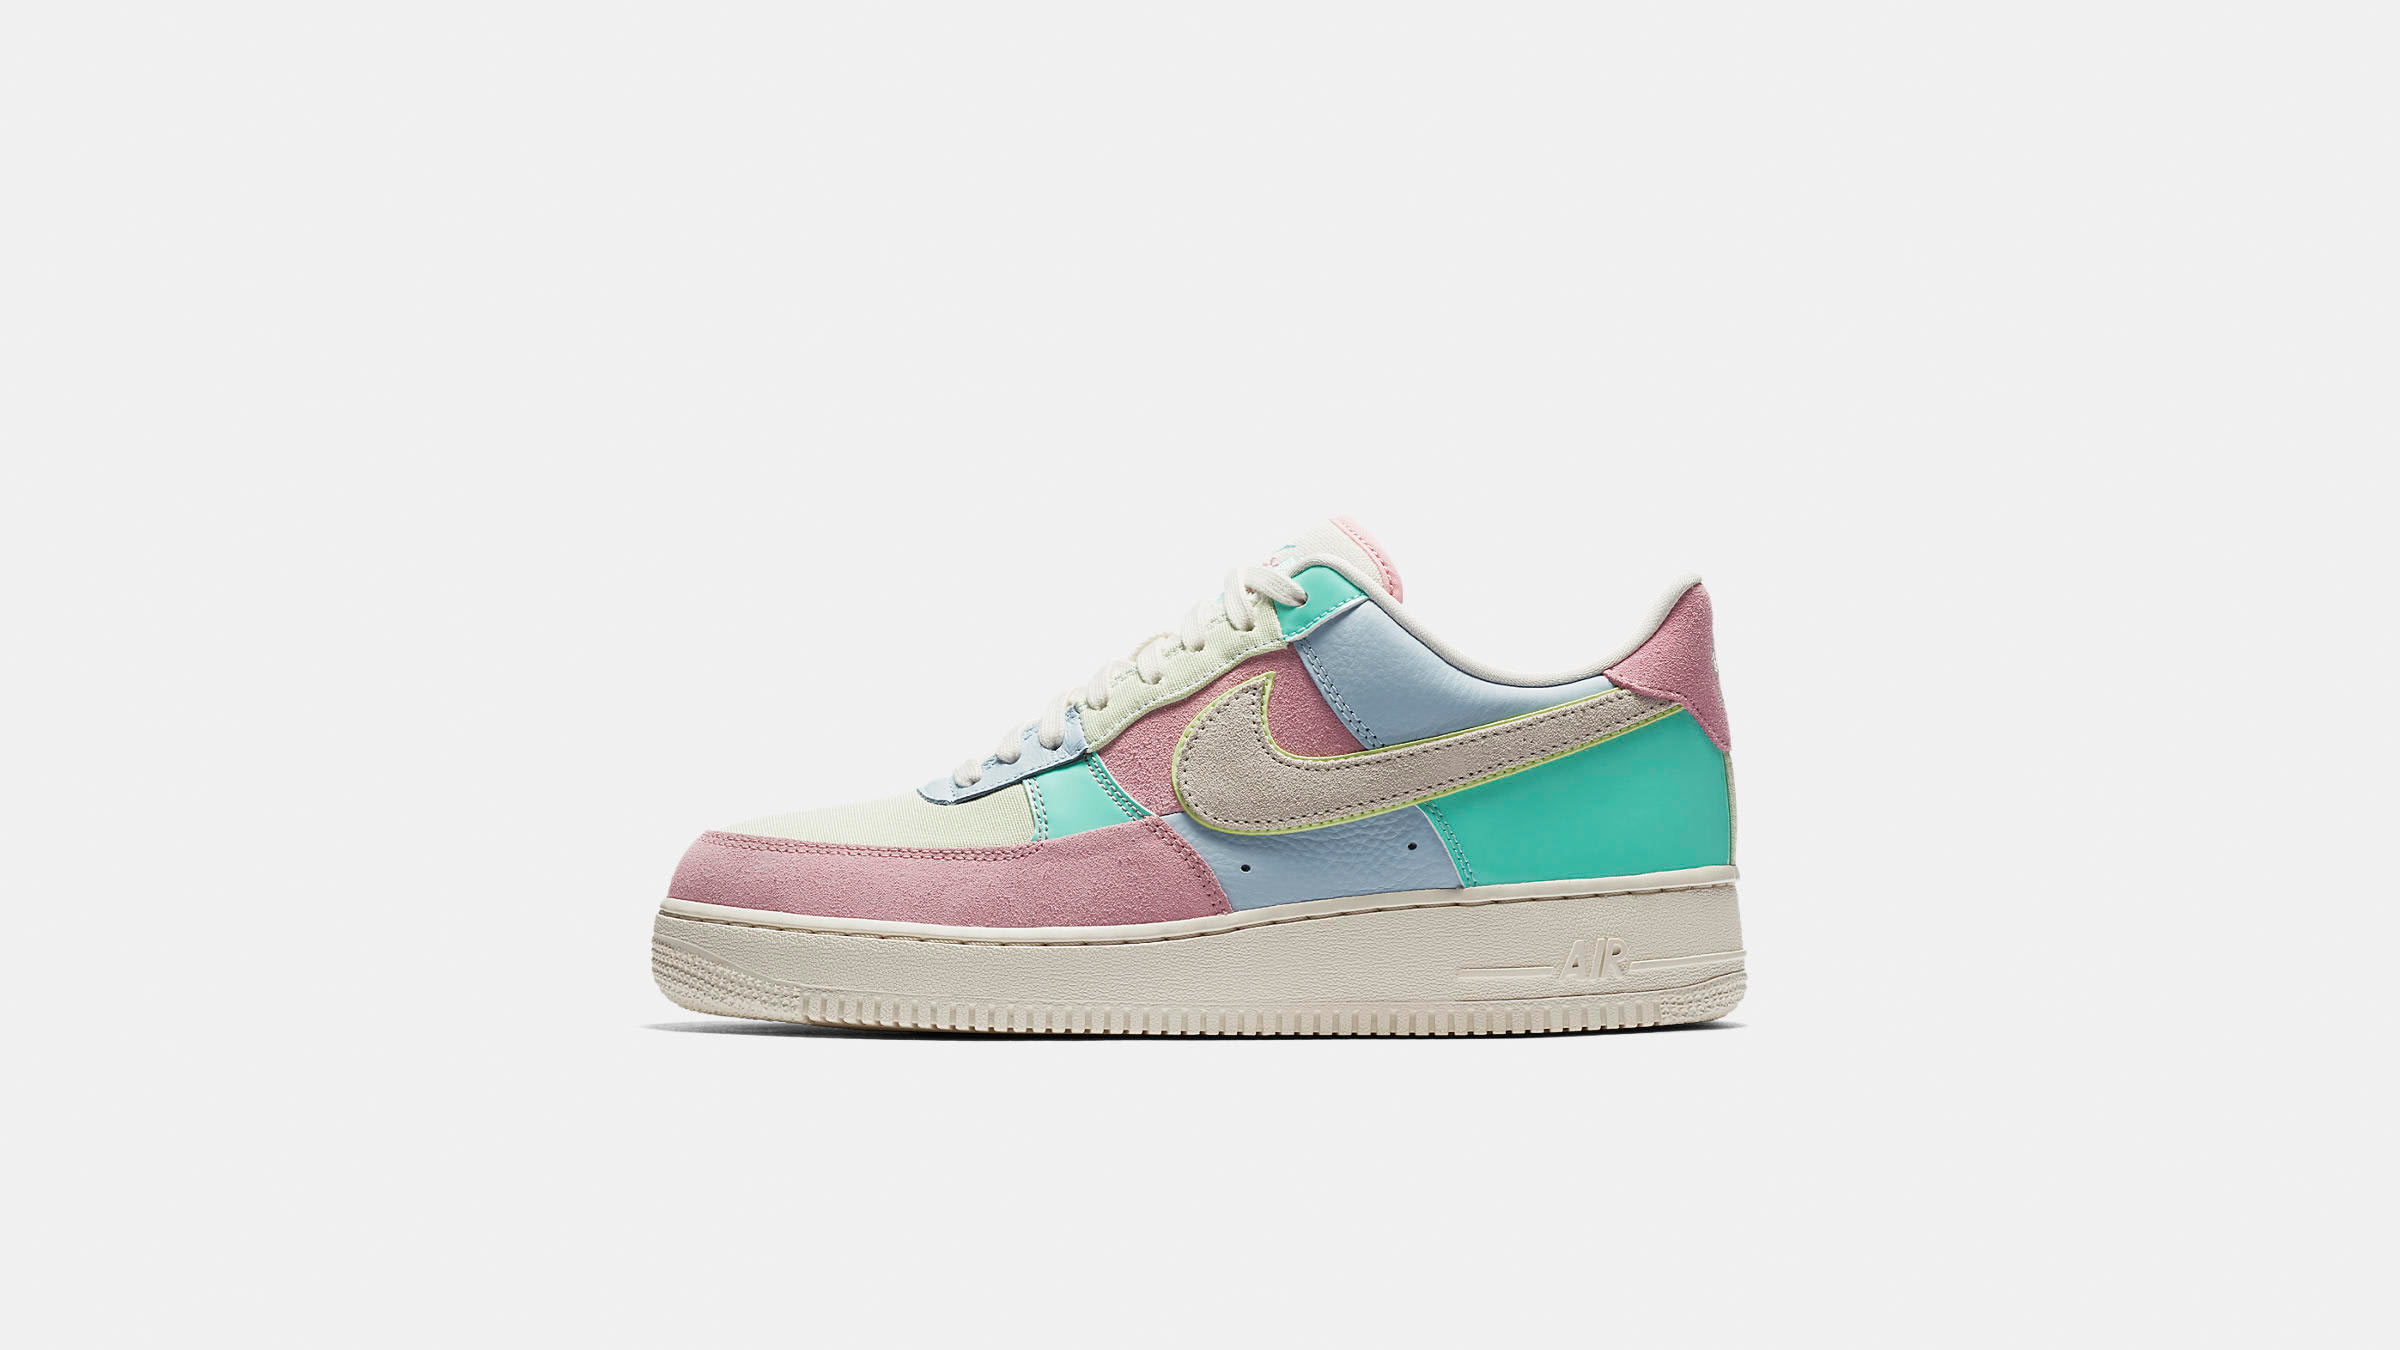 Tradition Dynamics Savvy Nike Air Force 1 '07 QS (Ice Blue, Sail & Turquoise) | END. Launches